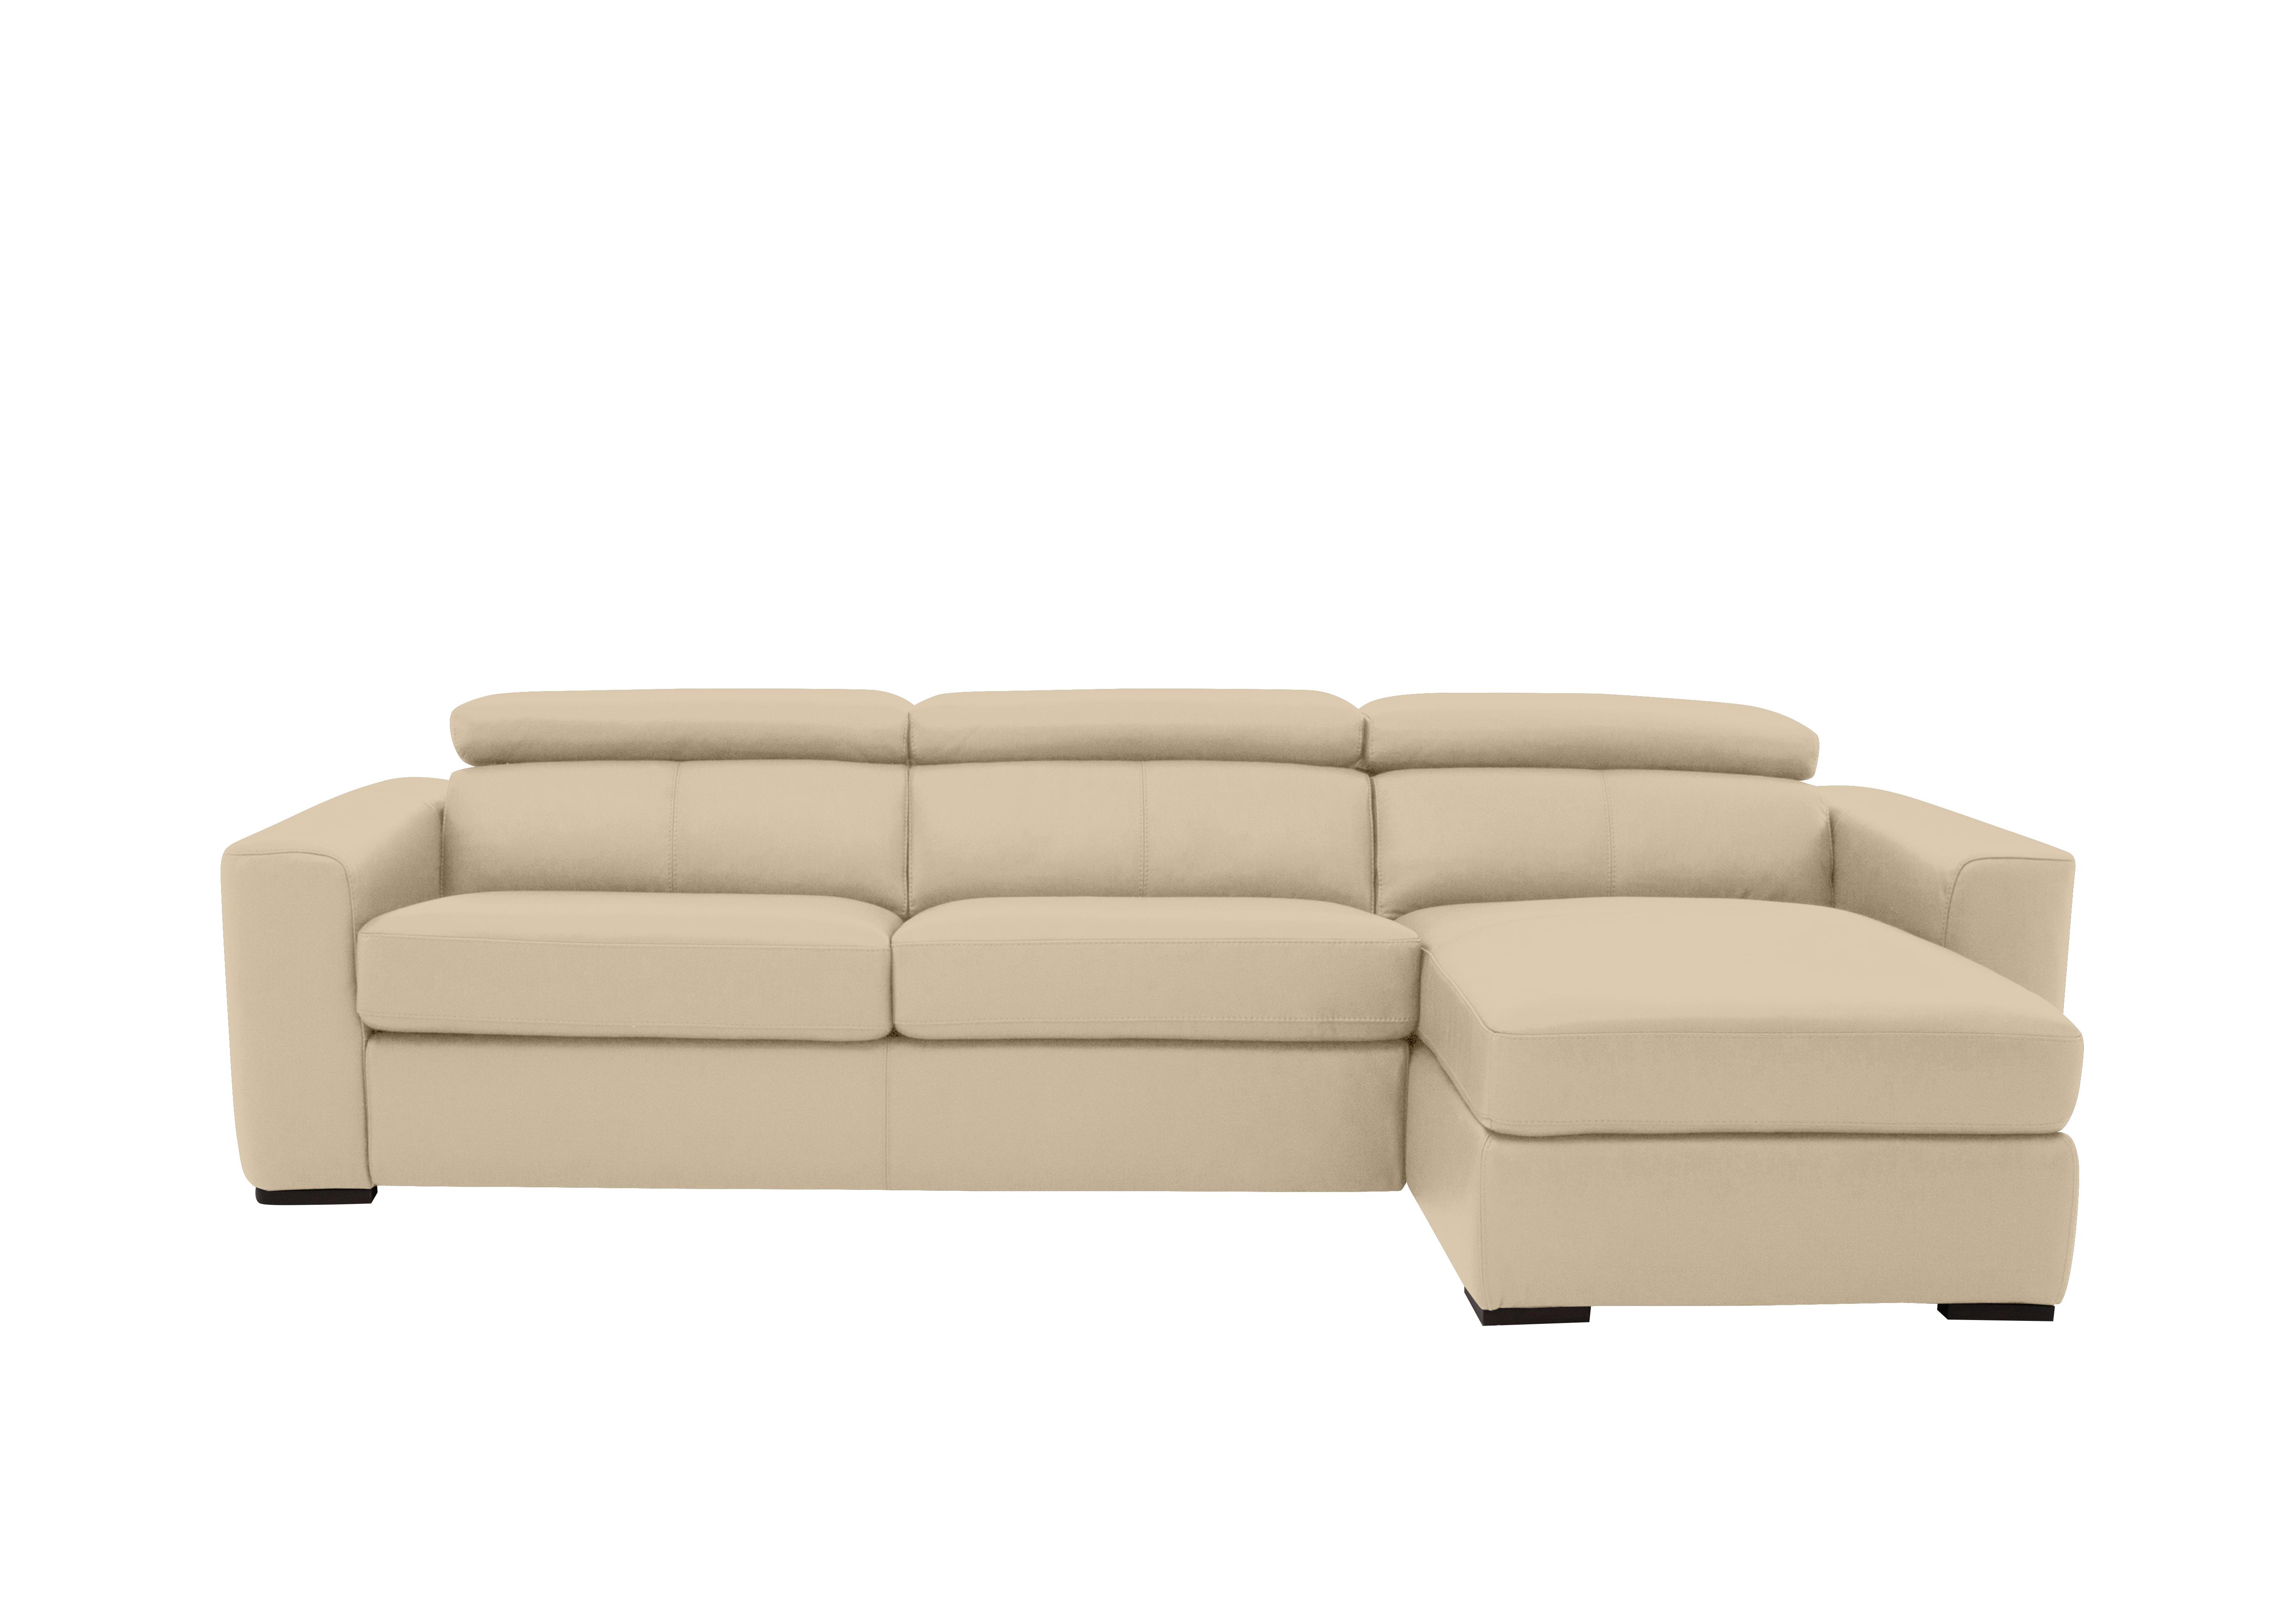 Infinity Leather Corner Chaise Sofa with Storage in Bv-862c Bisque on Furniture Village